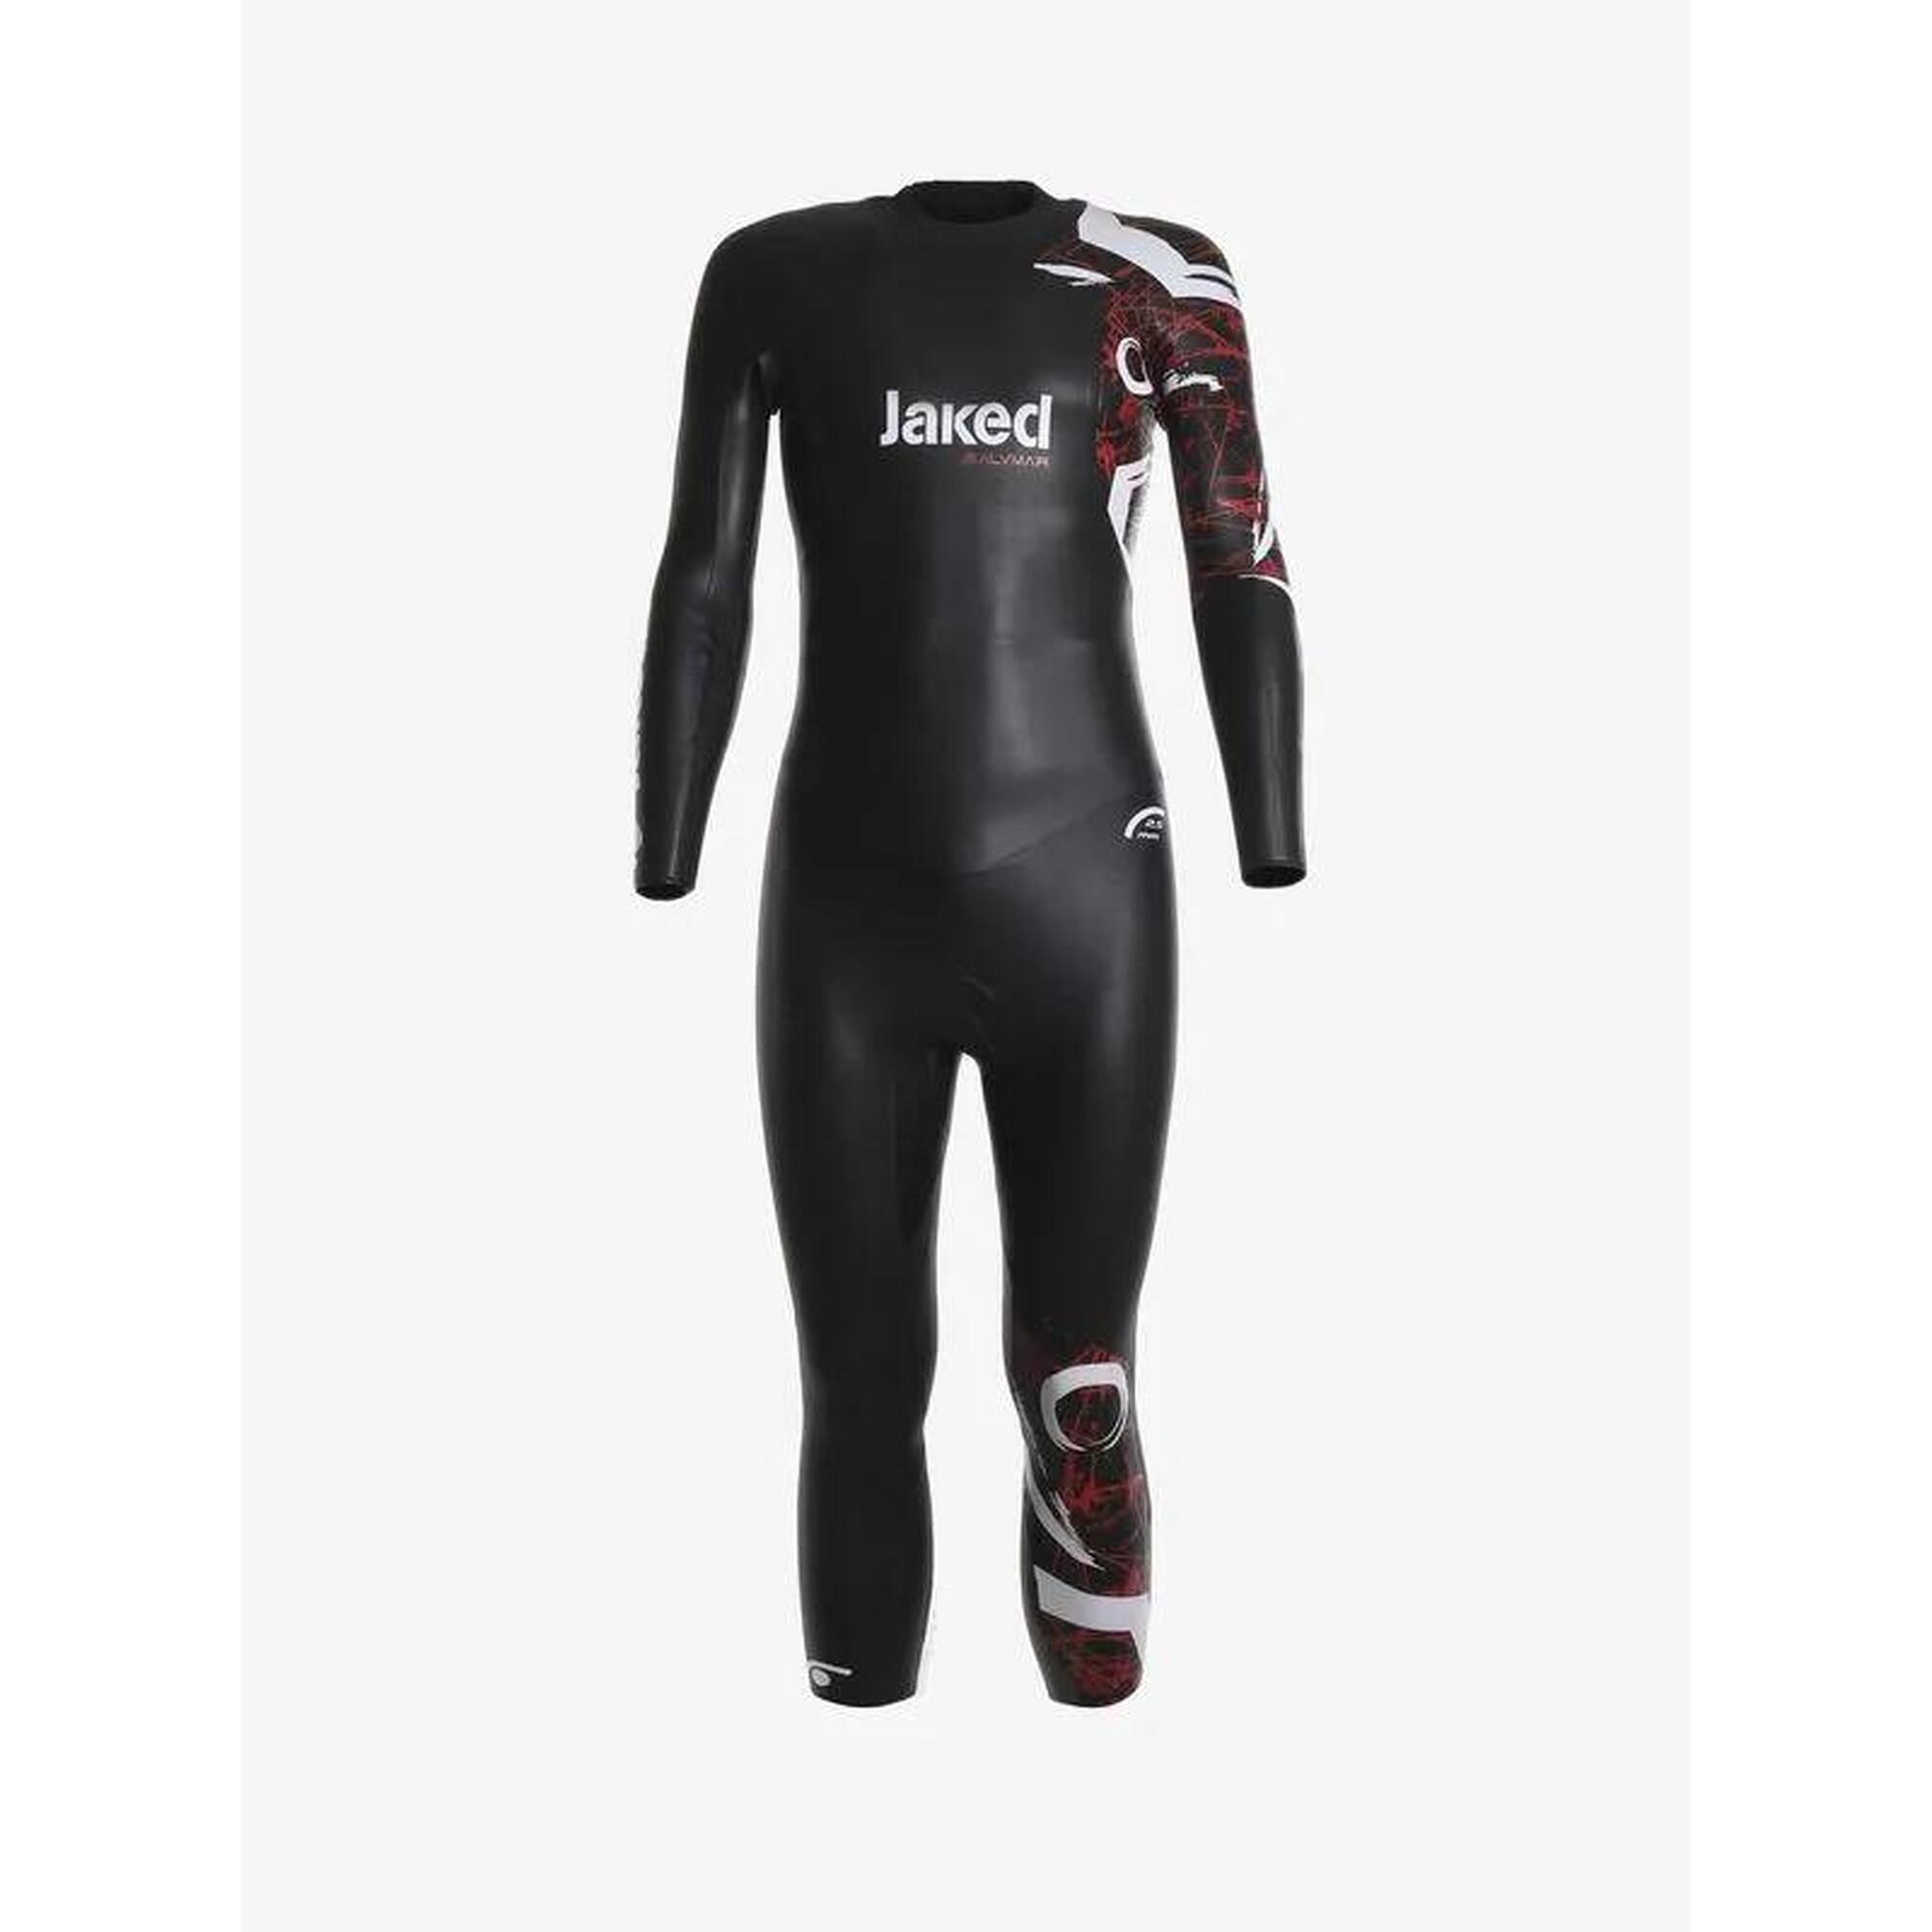 FFWW ONE-THICKNESS MEN 2.5MM WETSUIT - BLACK/RED